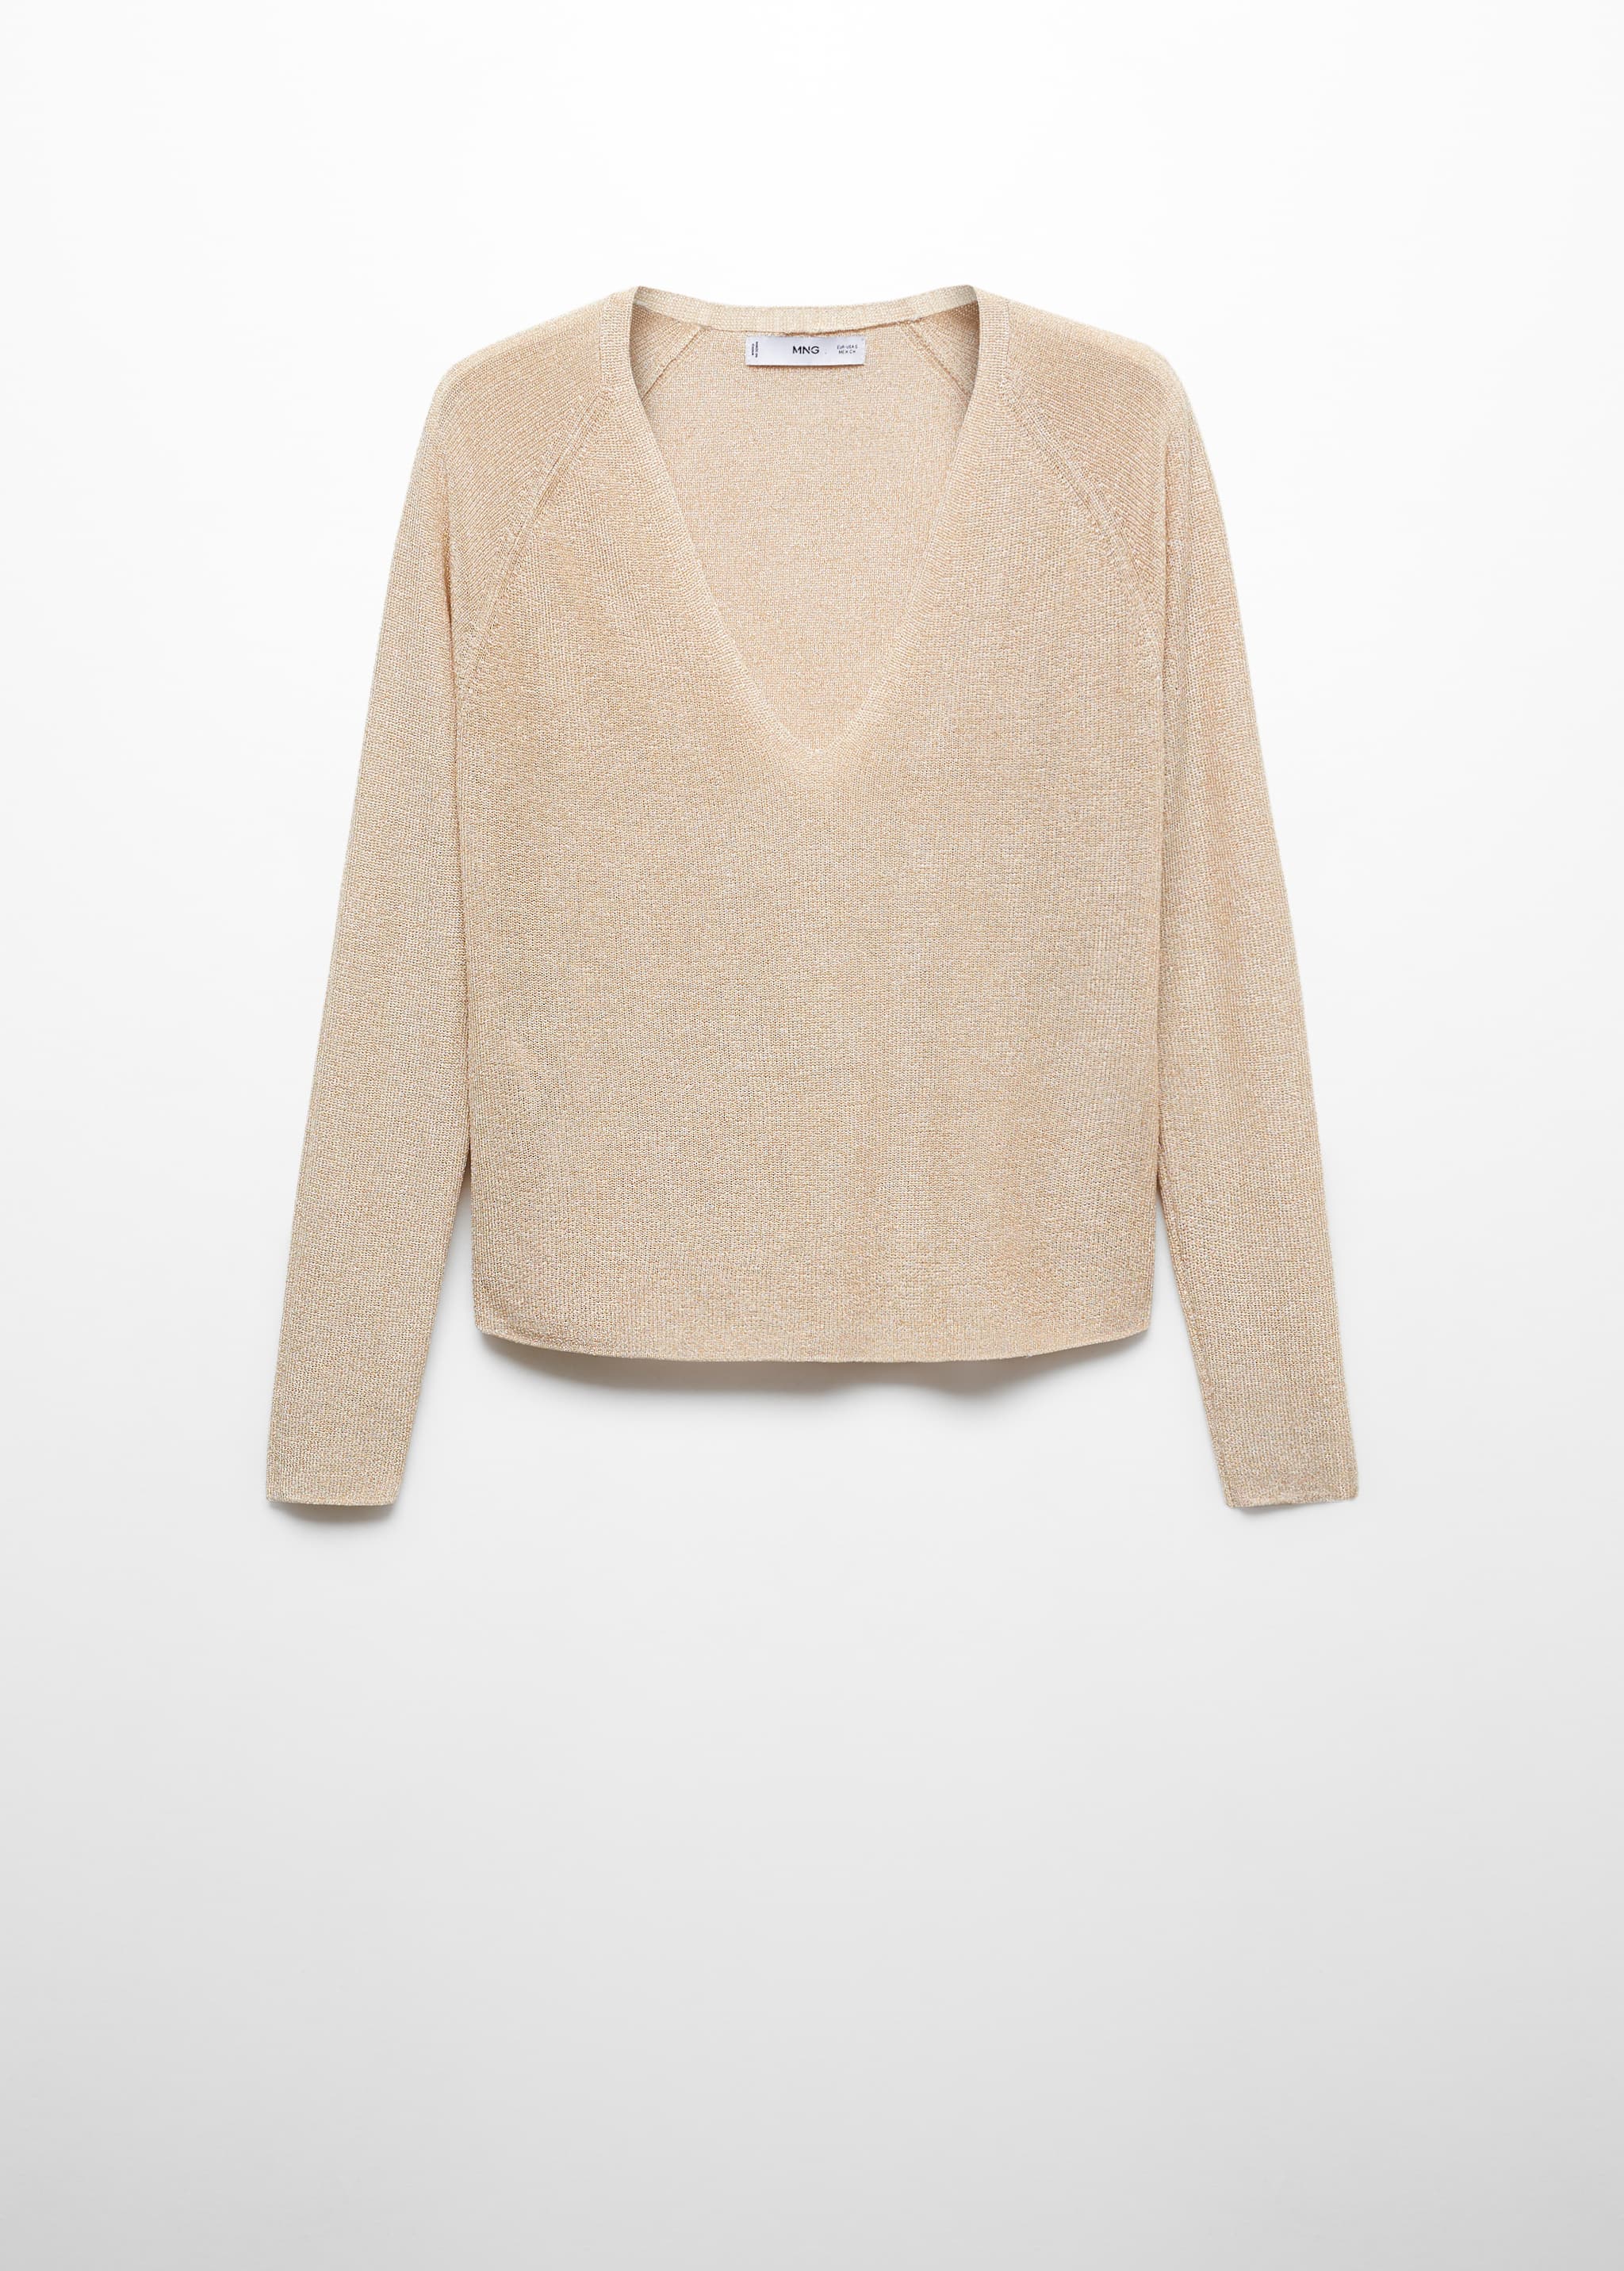 V-neck lurex sweater - Article without model